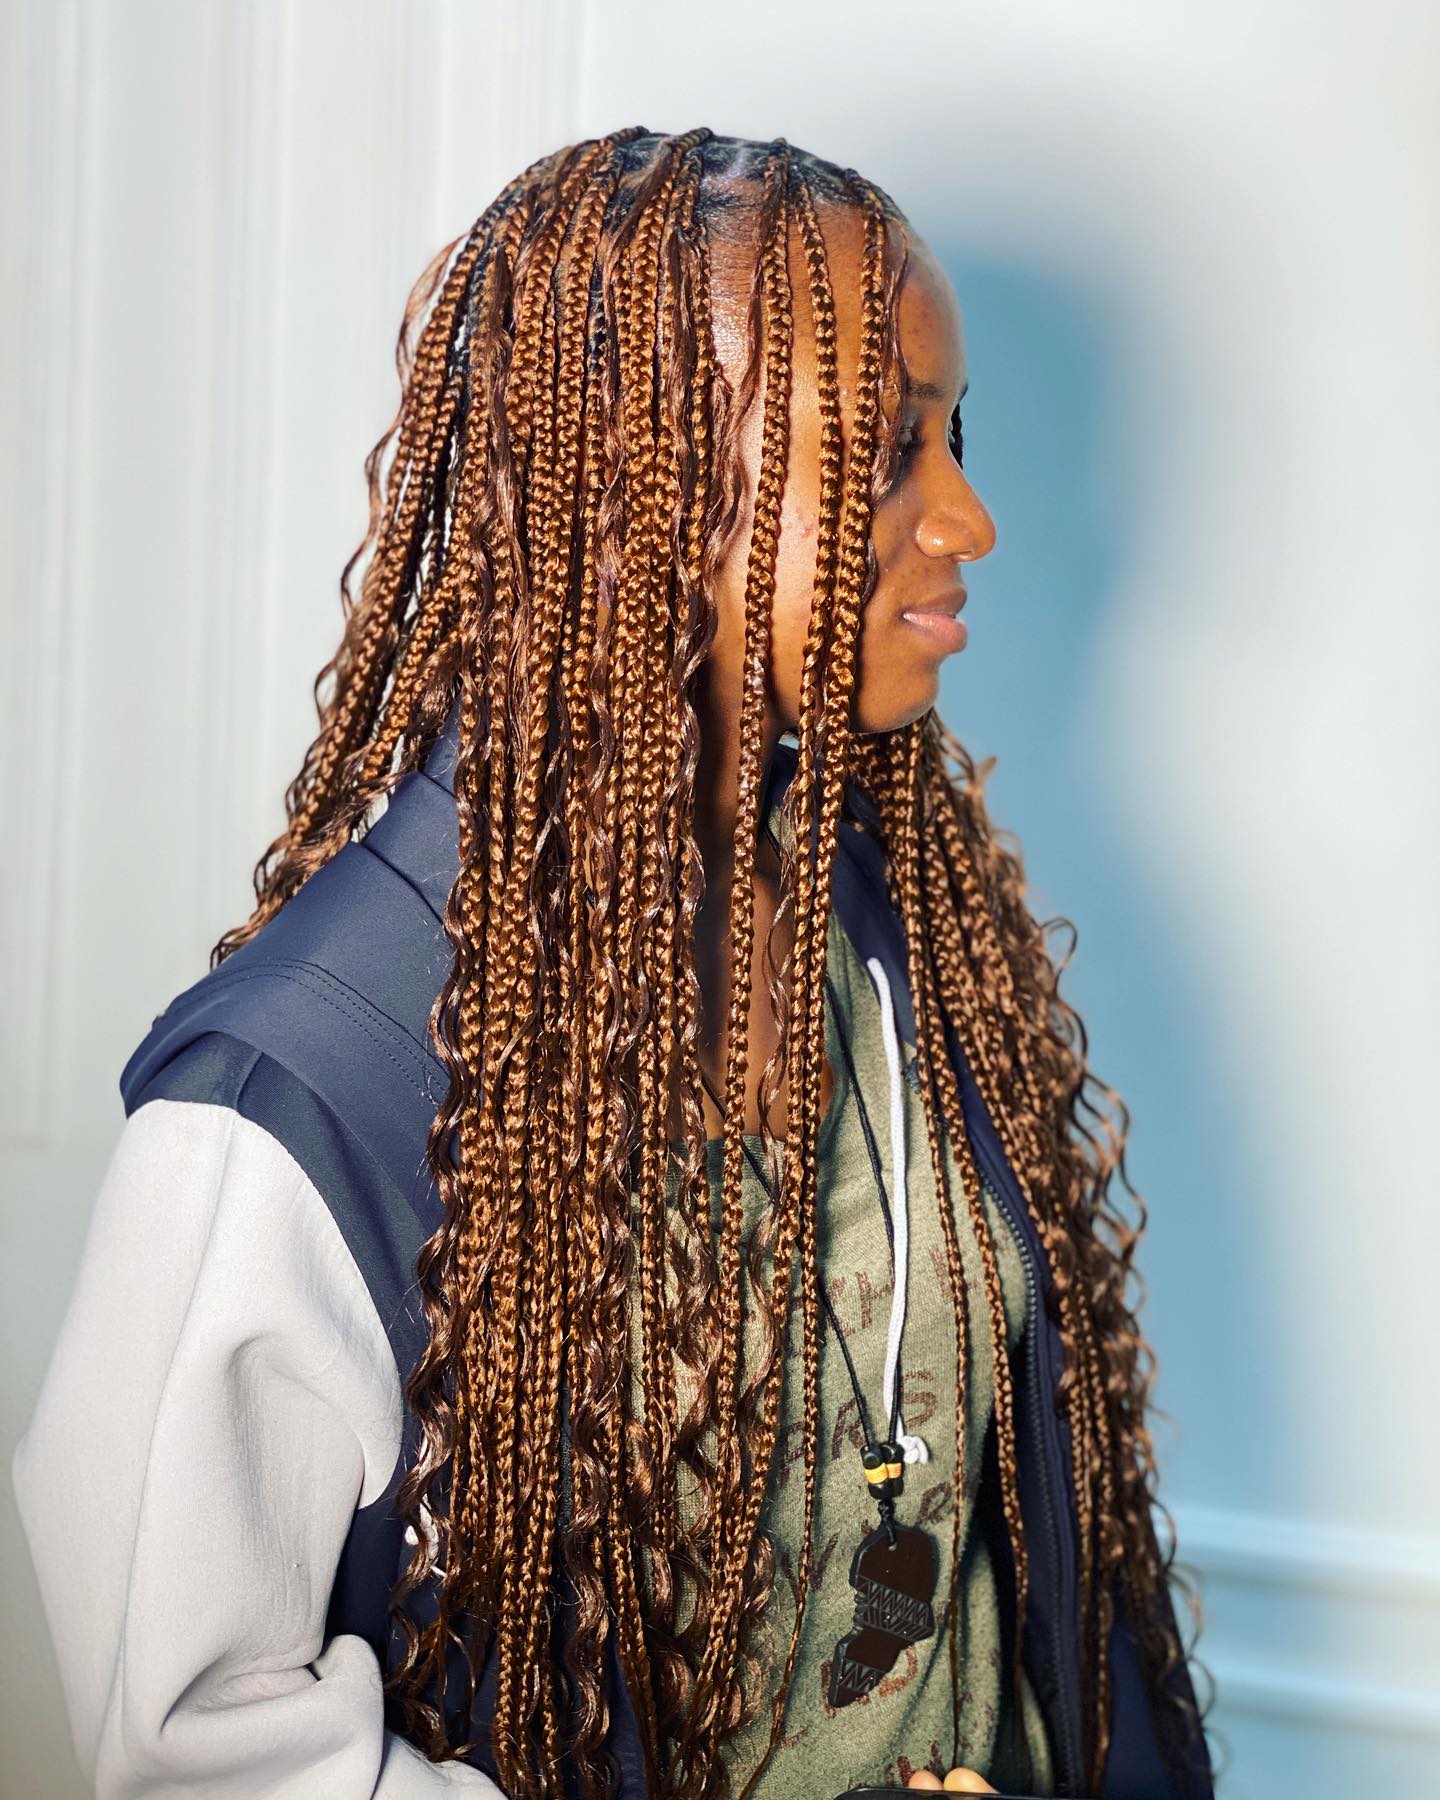 Image of Brown Knotless Braids With Curls in the style of Braids With Curls